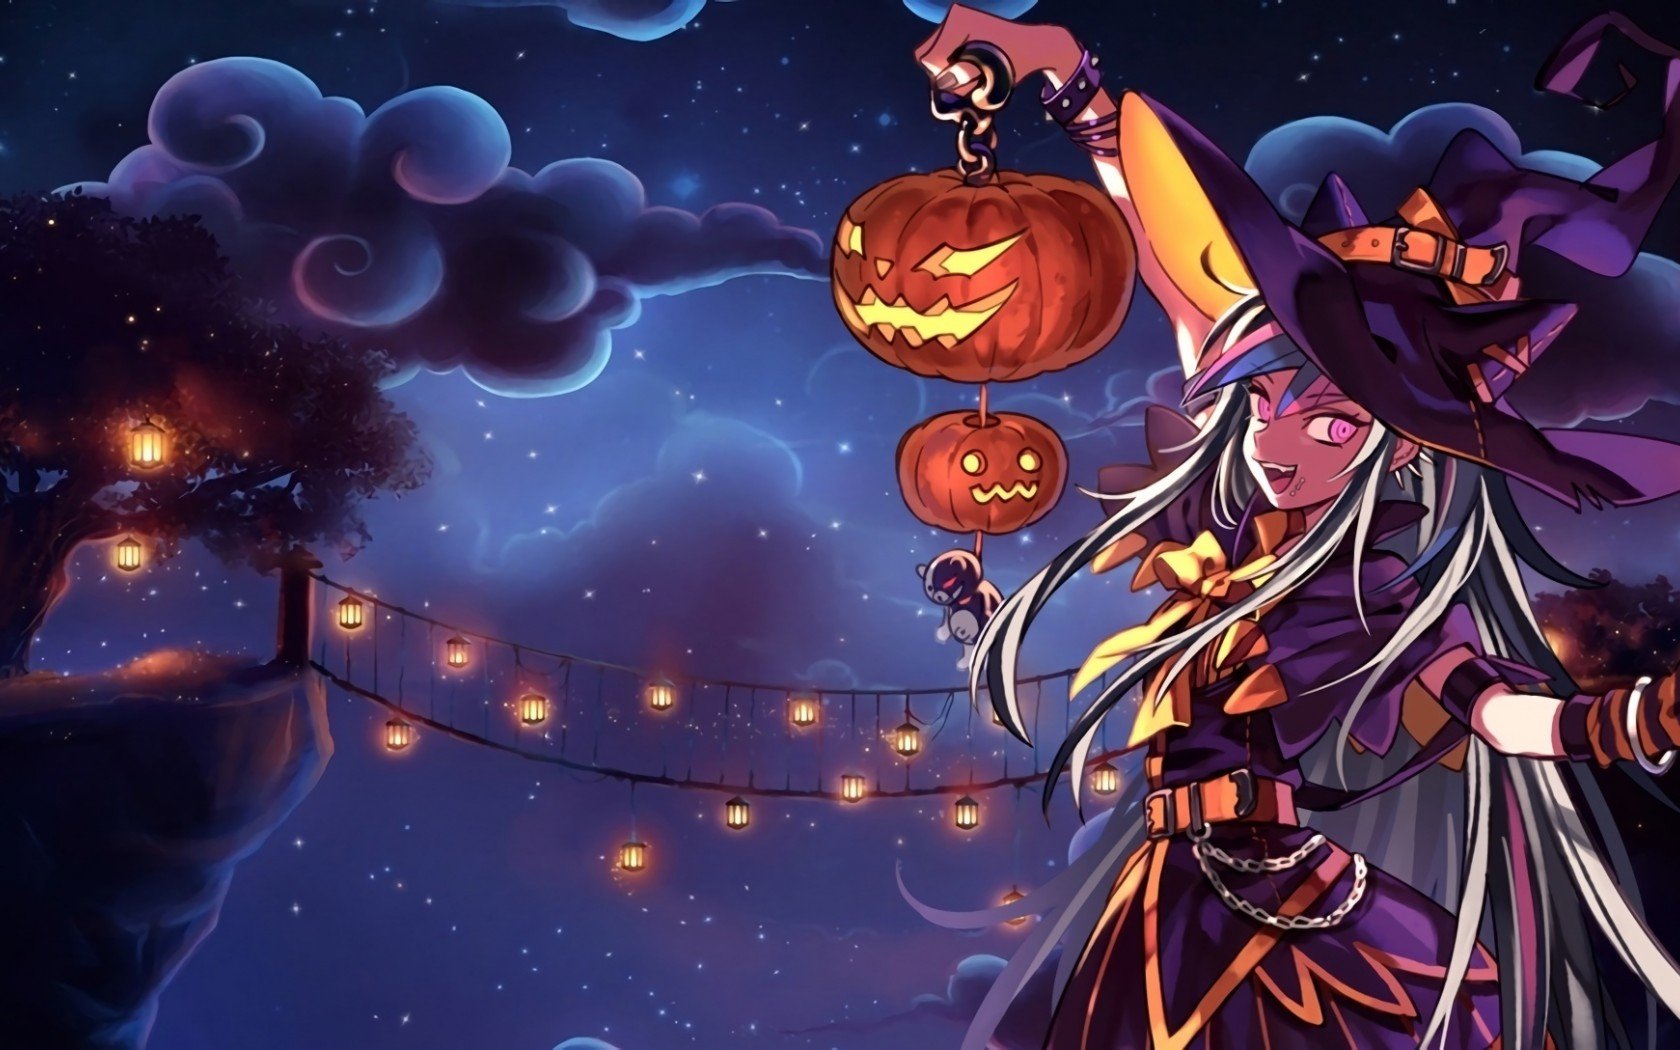 anime, Art, Before, Bridge, Candle, Clouds, Halloween, Hand, Hat, Holding, Holiday, Lantern, Mountain, Night, Pumpkin, Pumpkins, Sky, Smile, Stars, Tree, Wich, Young Wallpaper